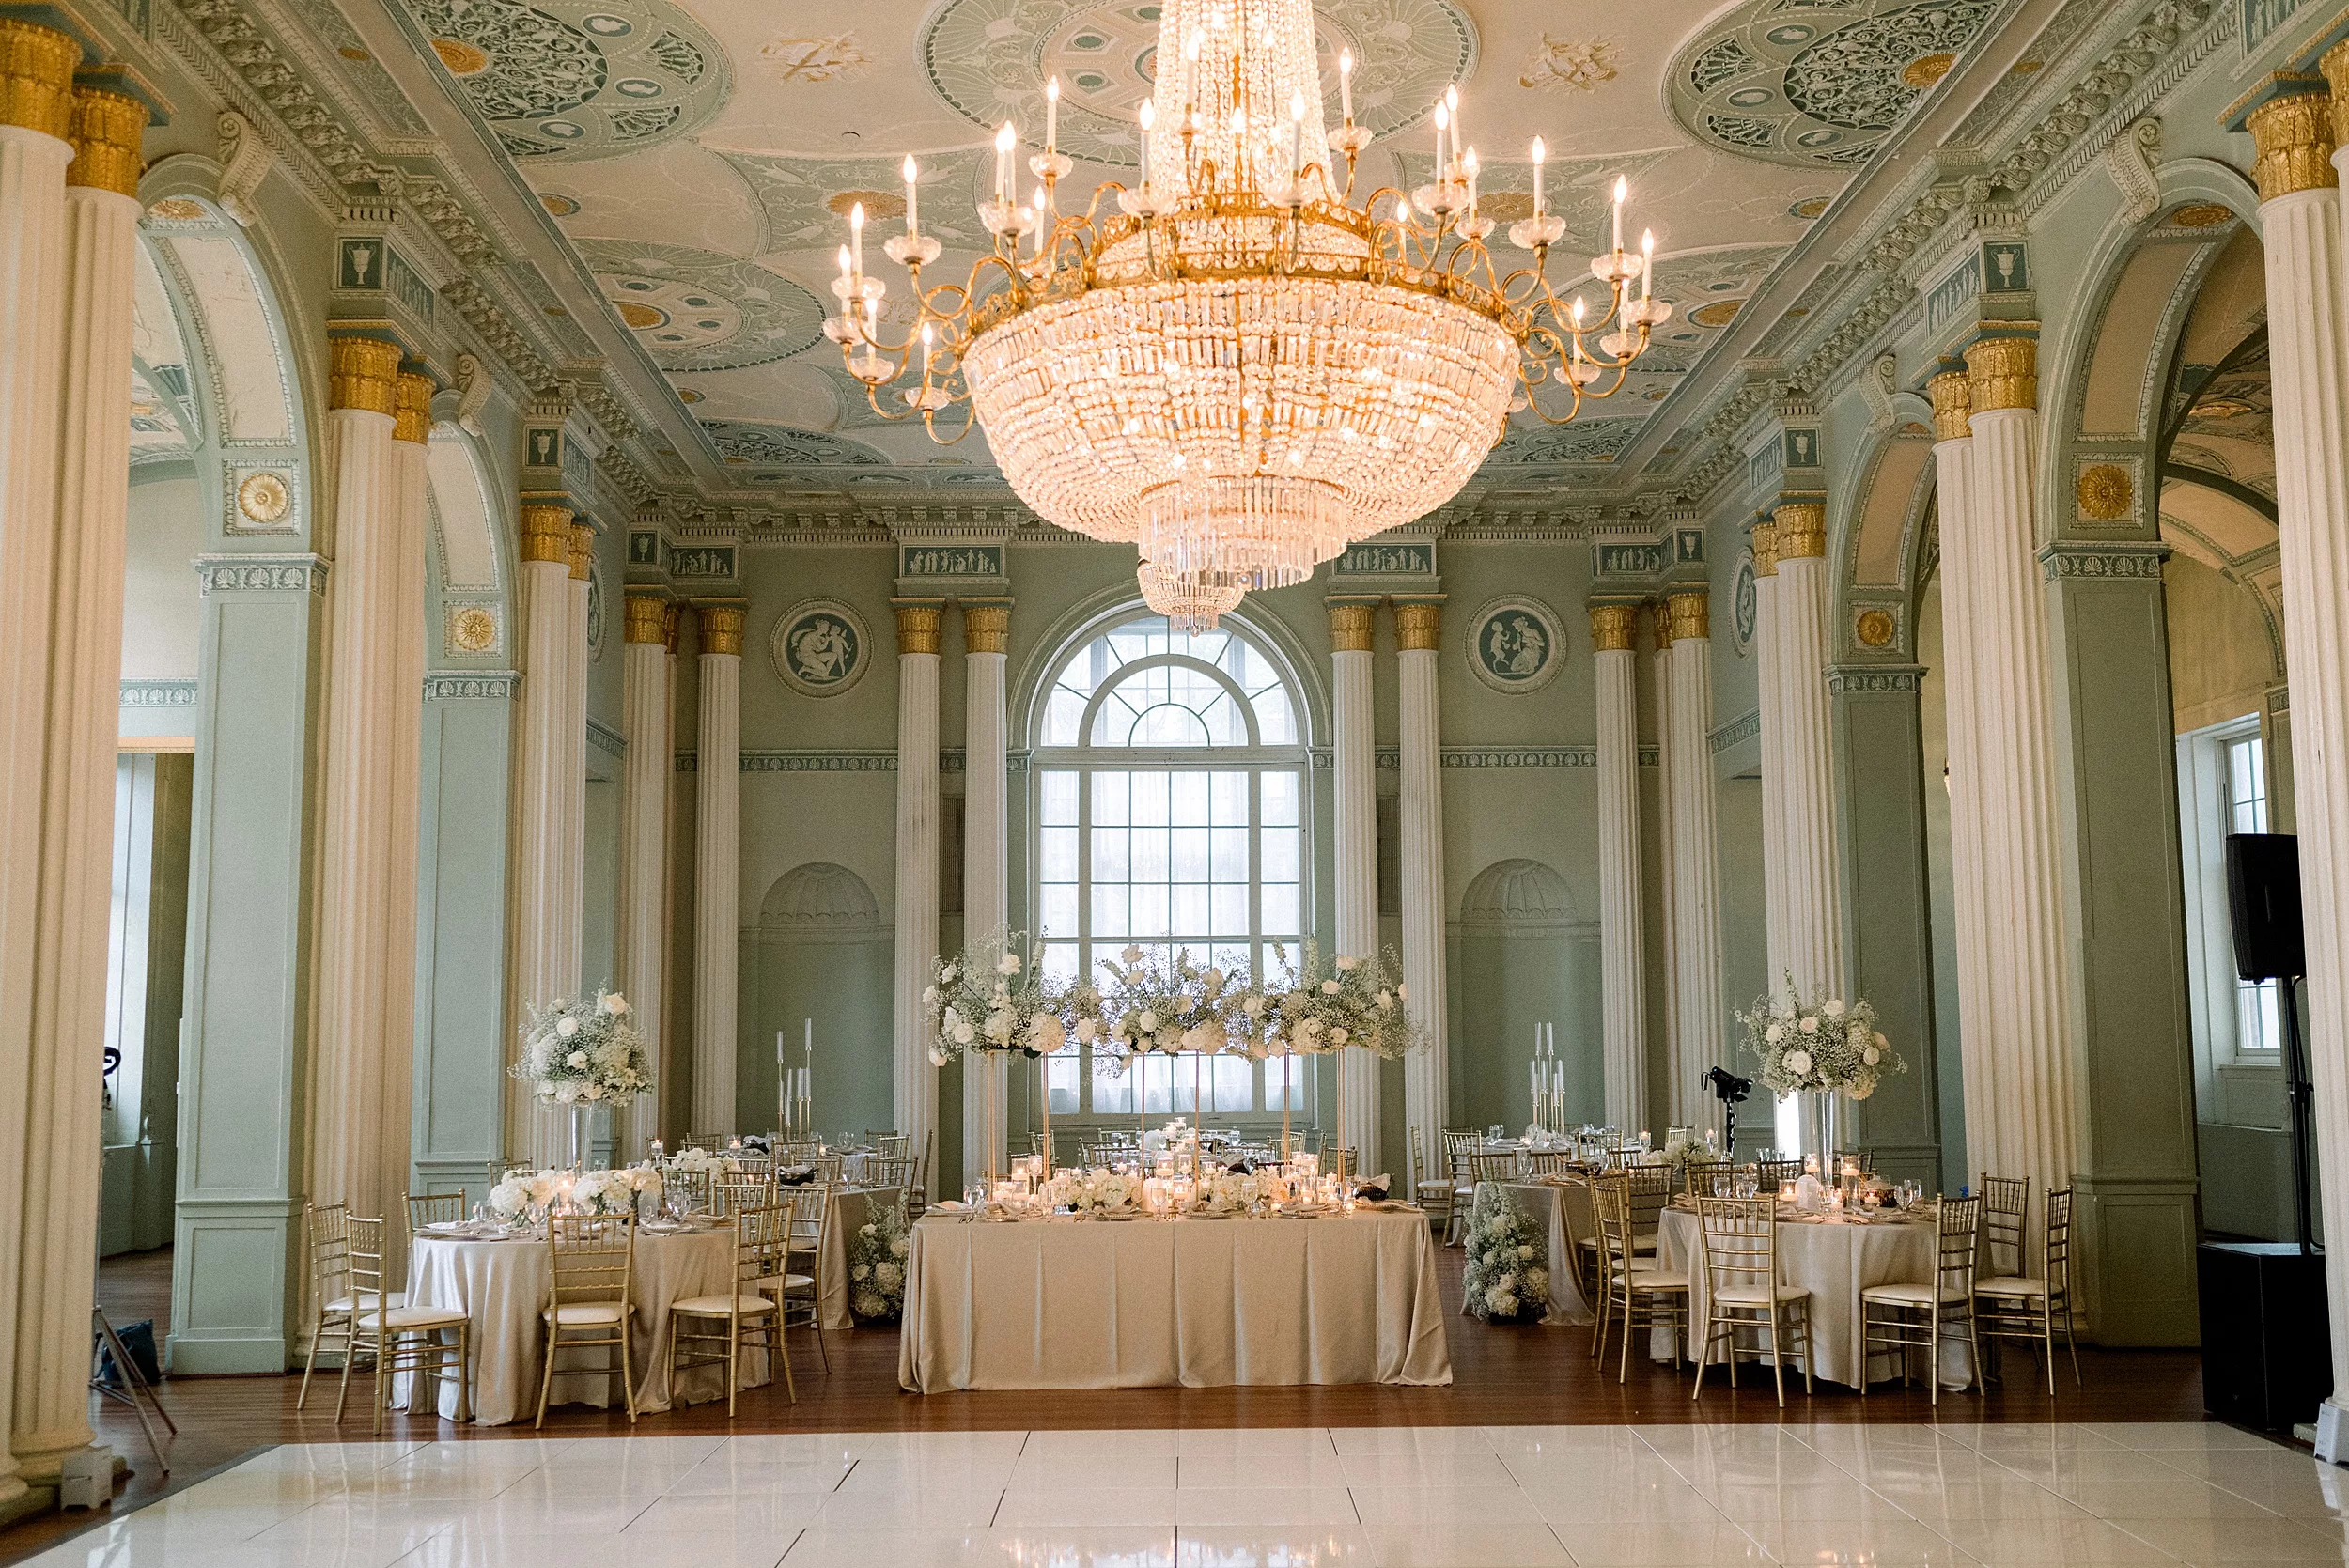 Details of a crystal chandelier and wedding reception setup at a Biltmore Ballrooms Wedding